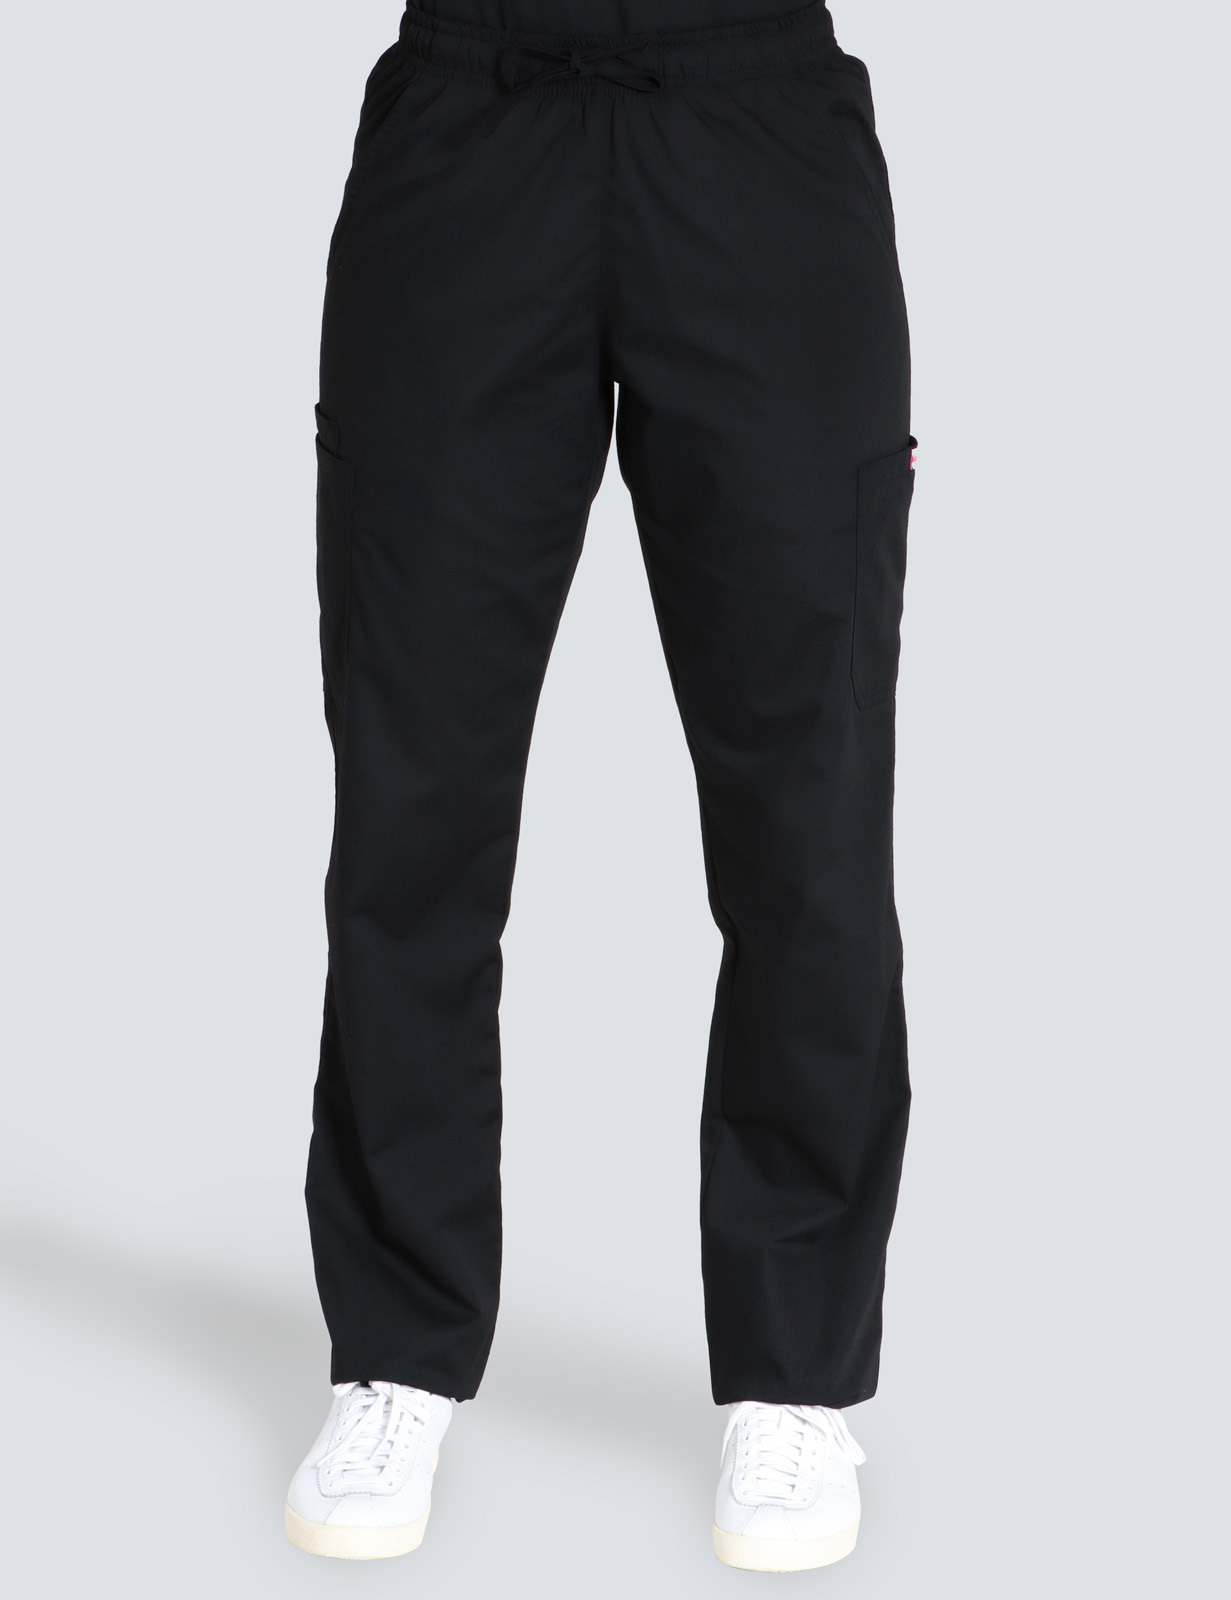 RBWH Nuclear Medicine Department Pant Only Bundle (Cargo Pants in Black)